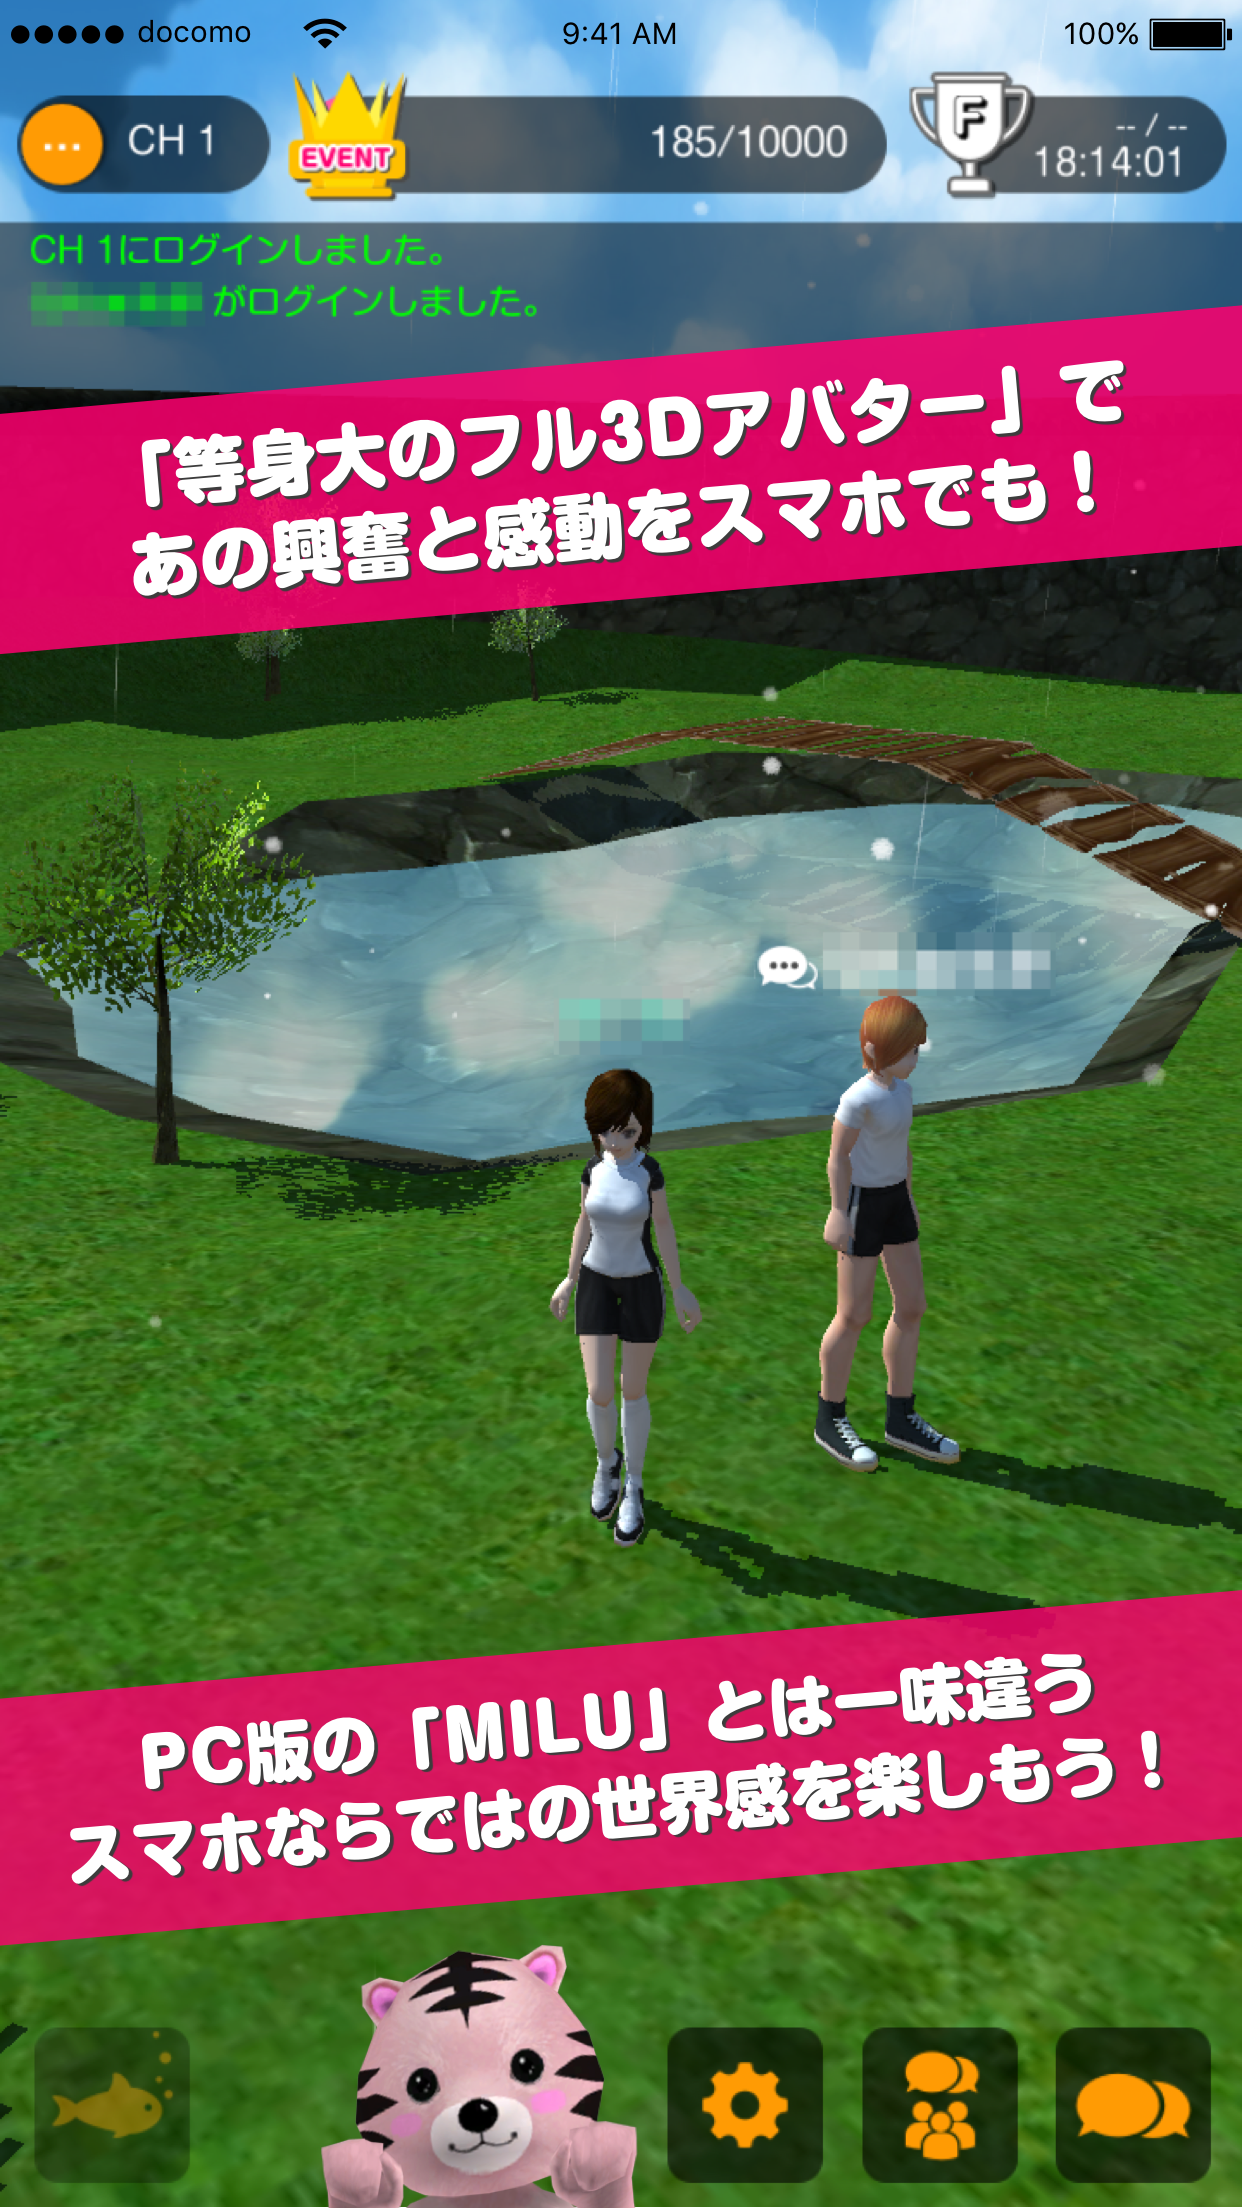 Screenshot 1 of Talking avatar game for adults - MILU on your smartphone 1.0.11